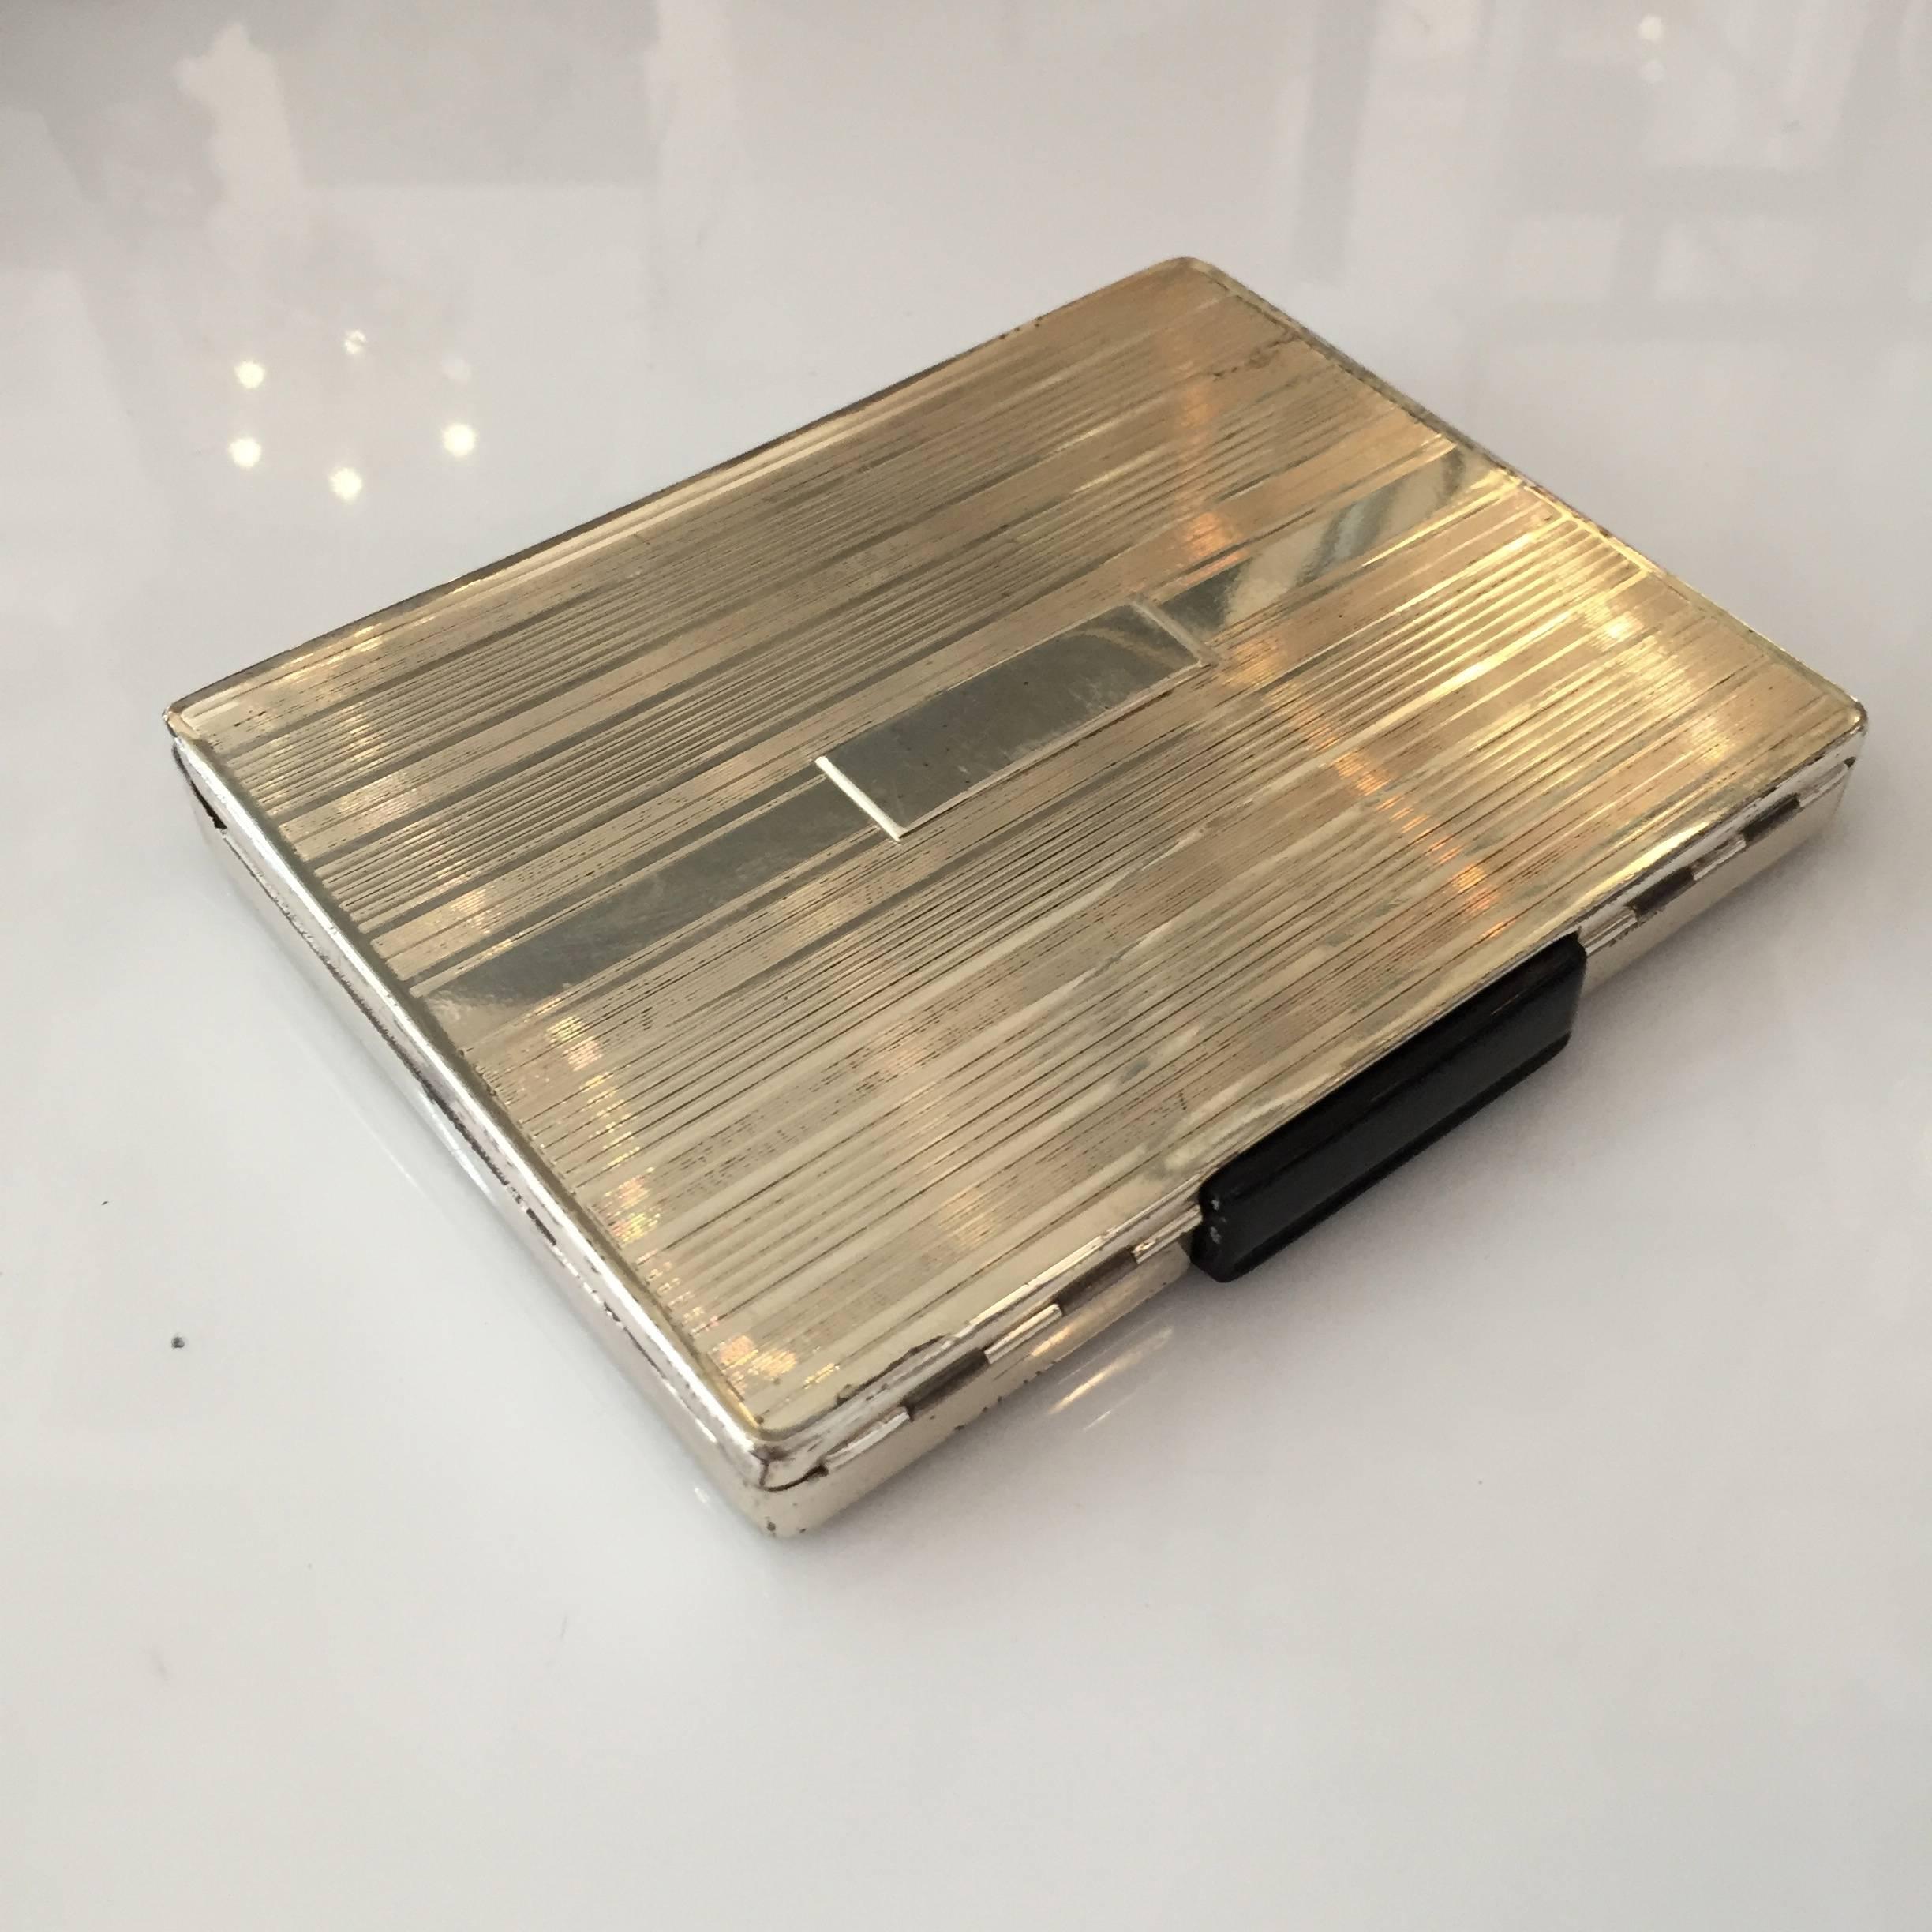 American Streamlined Sterling Silver Cigarette Case with Dispenser